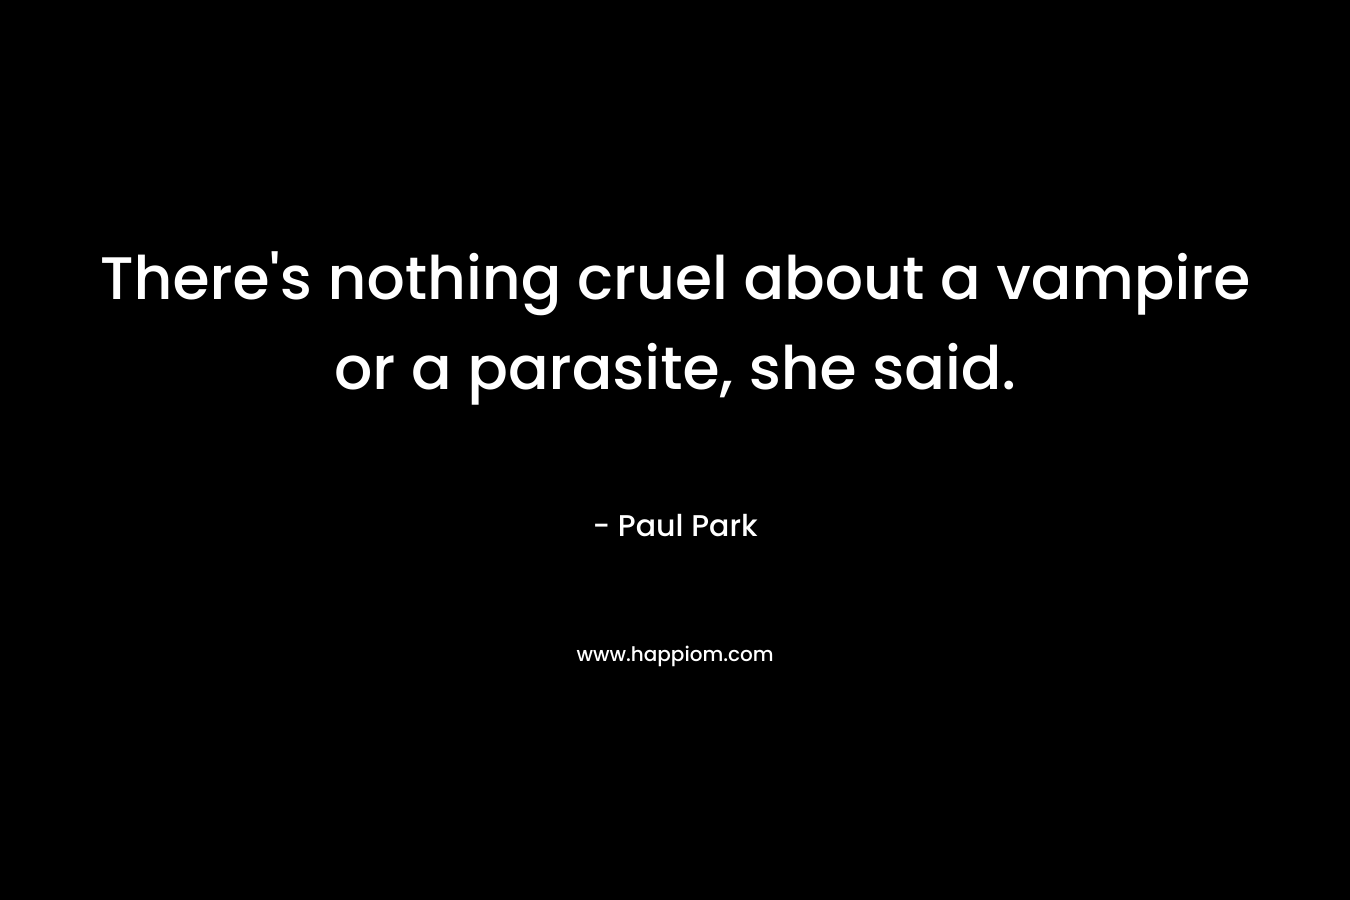 There’s nothing cruel about a vampire or a parasite, she said. – Paul Park